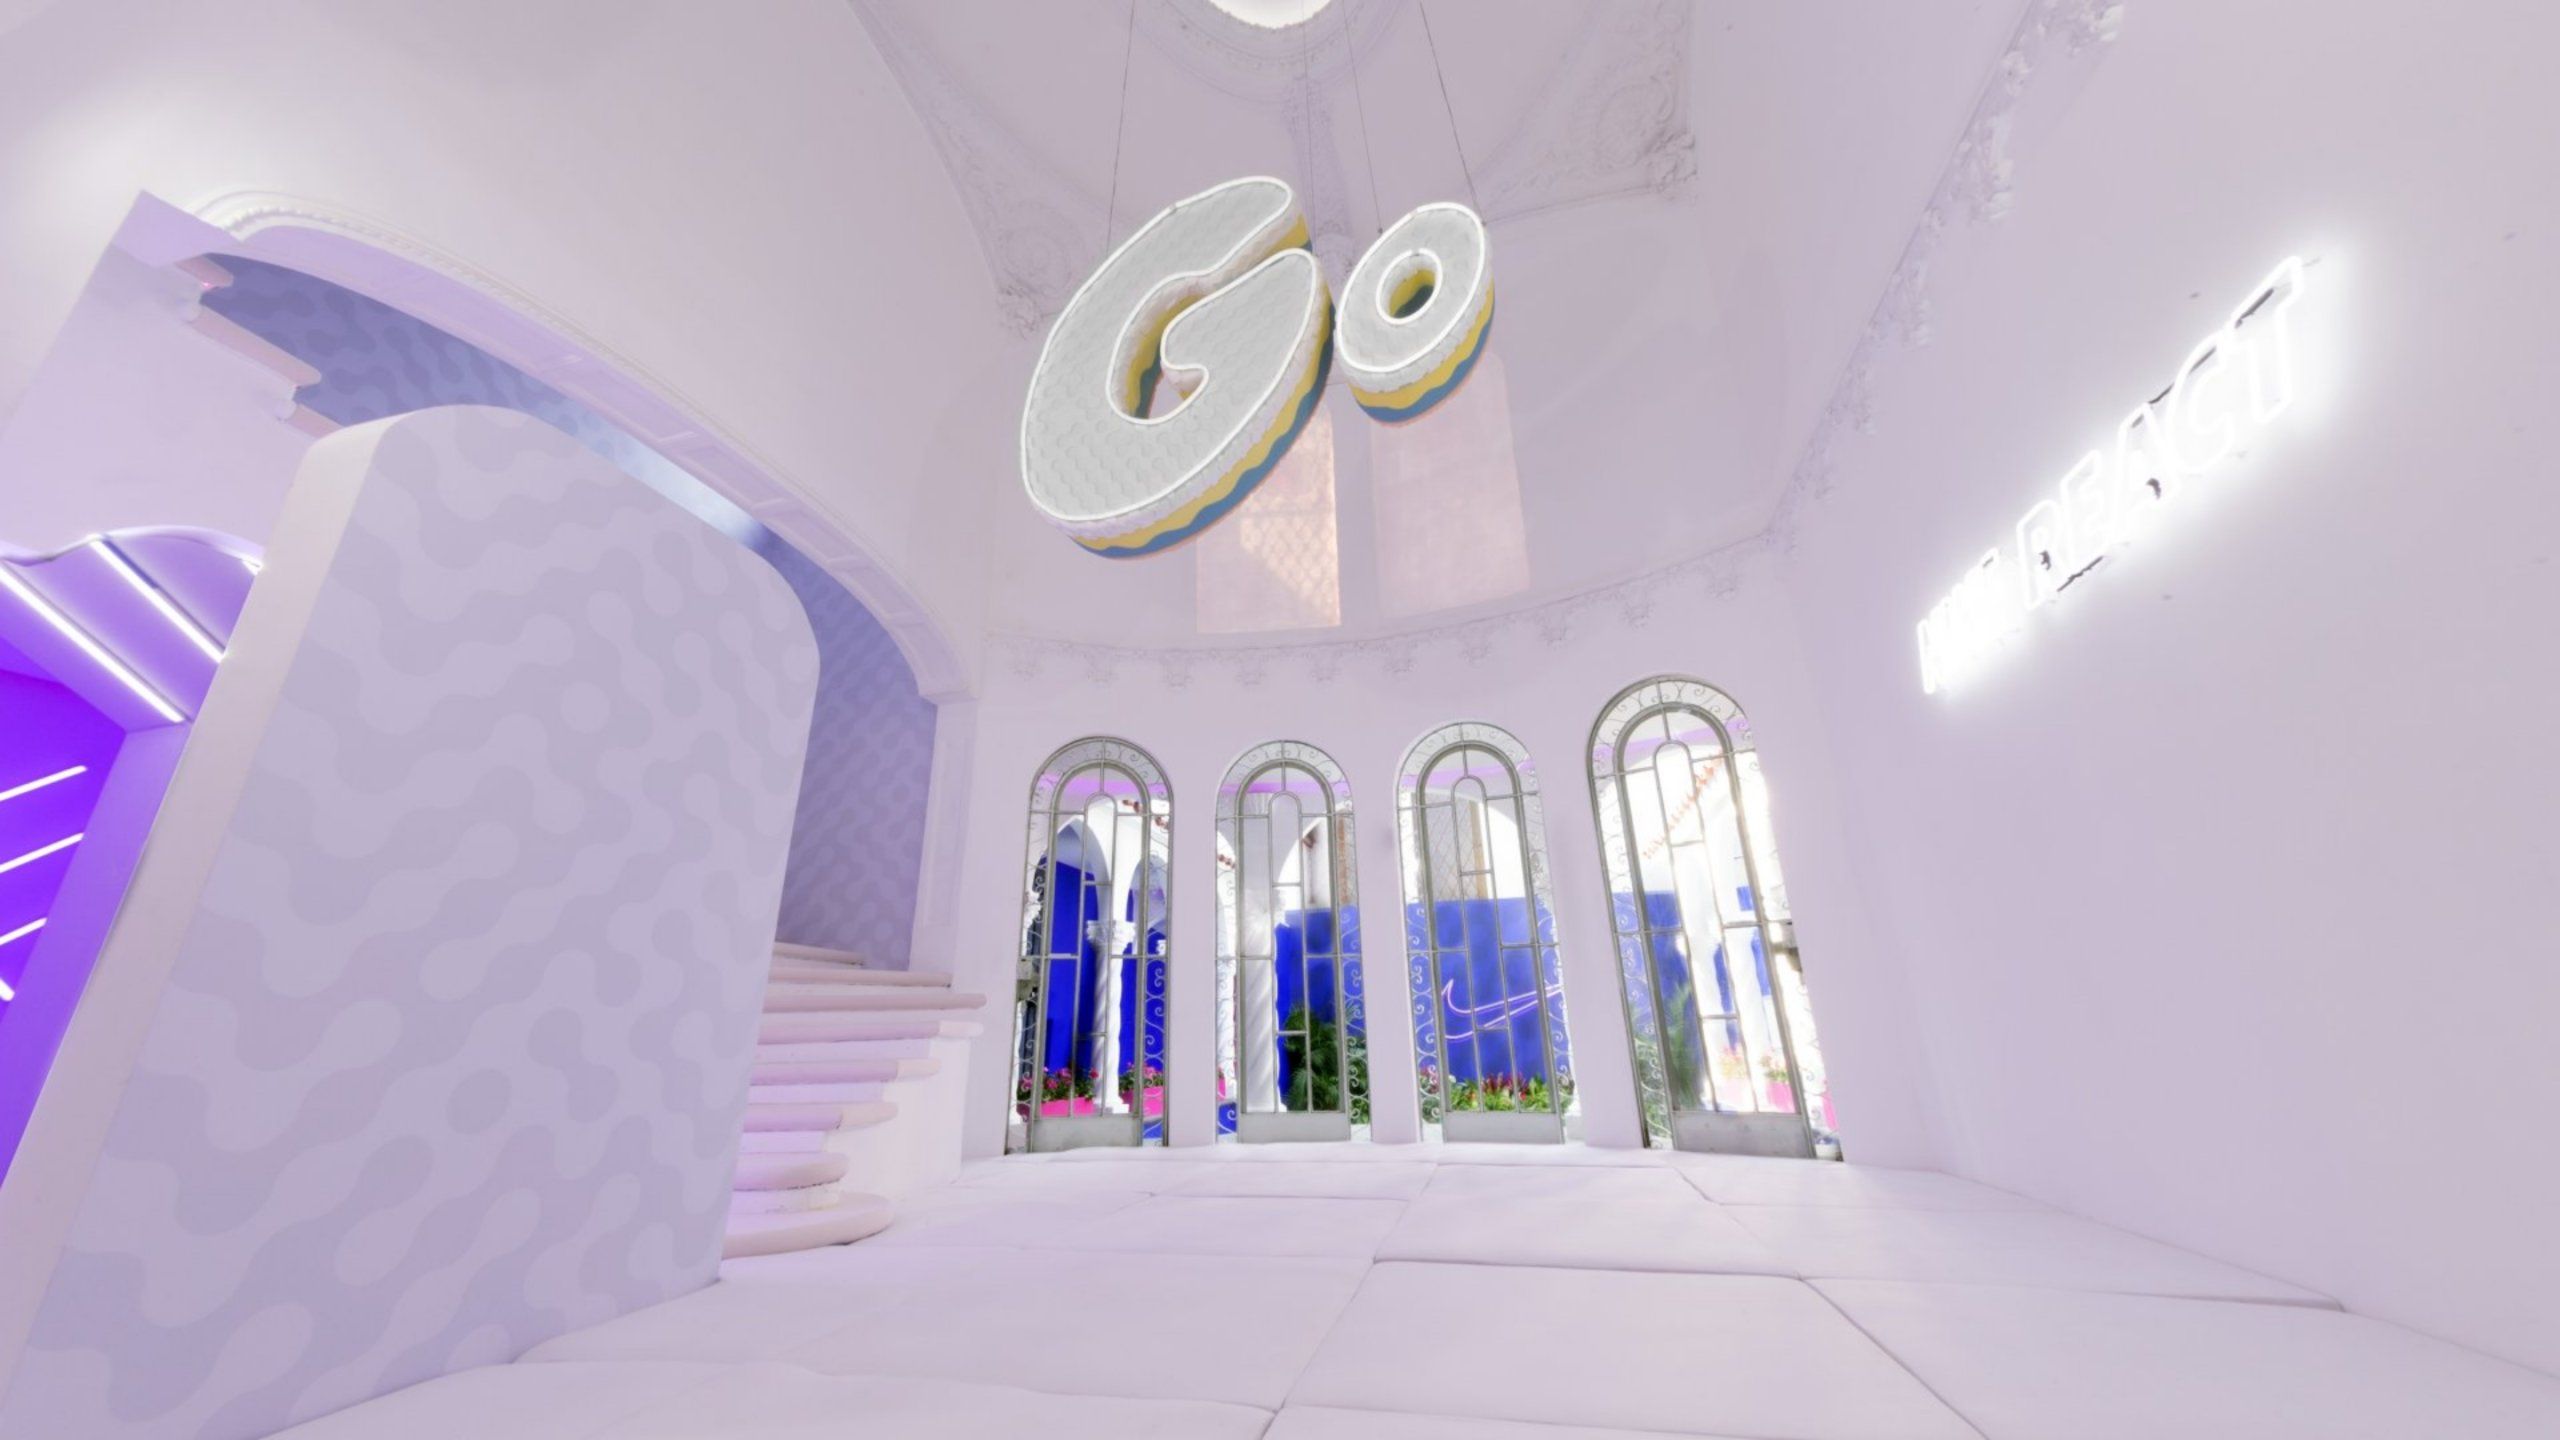 House of Go interior with sign hanging that says Go. Pillow foor, padded staircase adn 4 tall windows